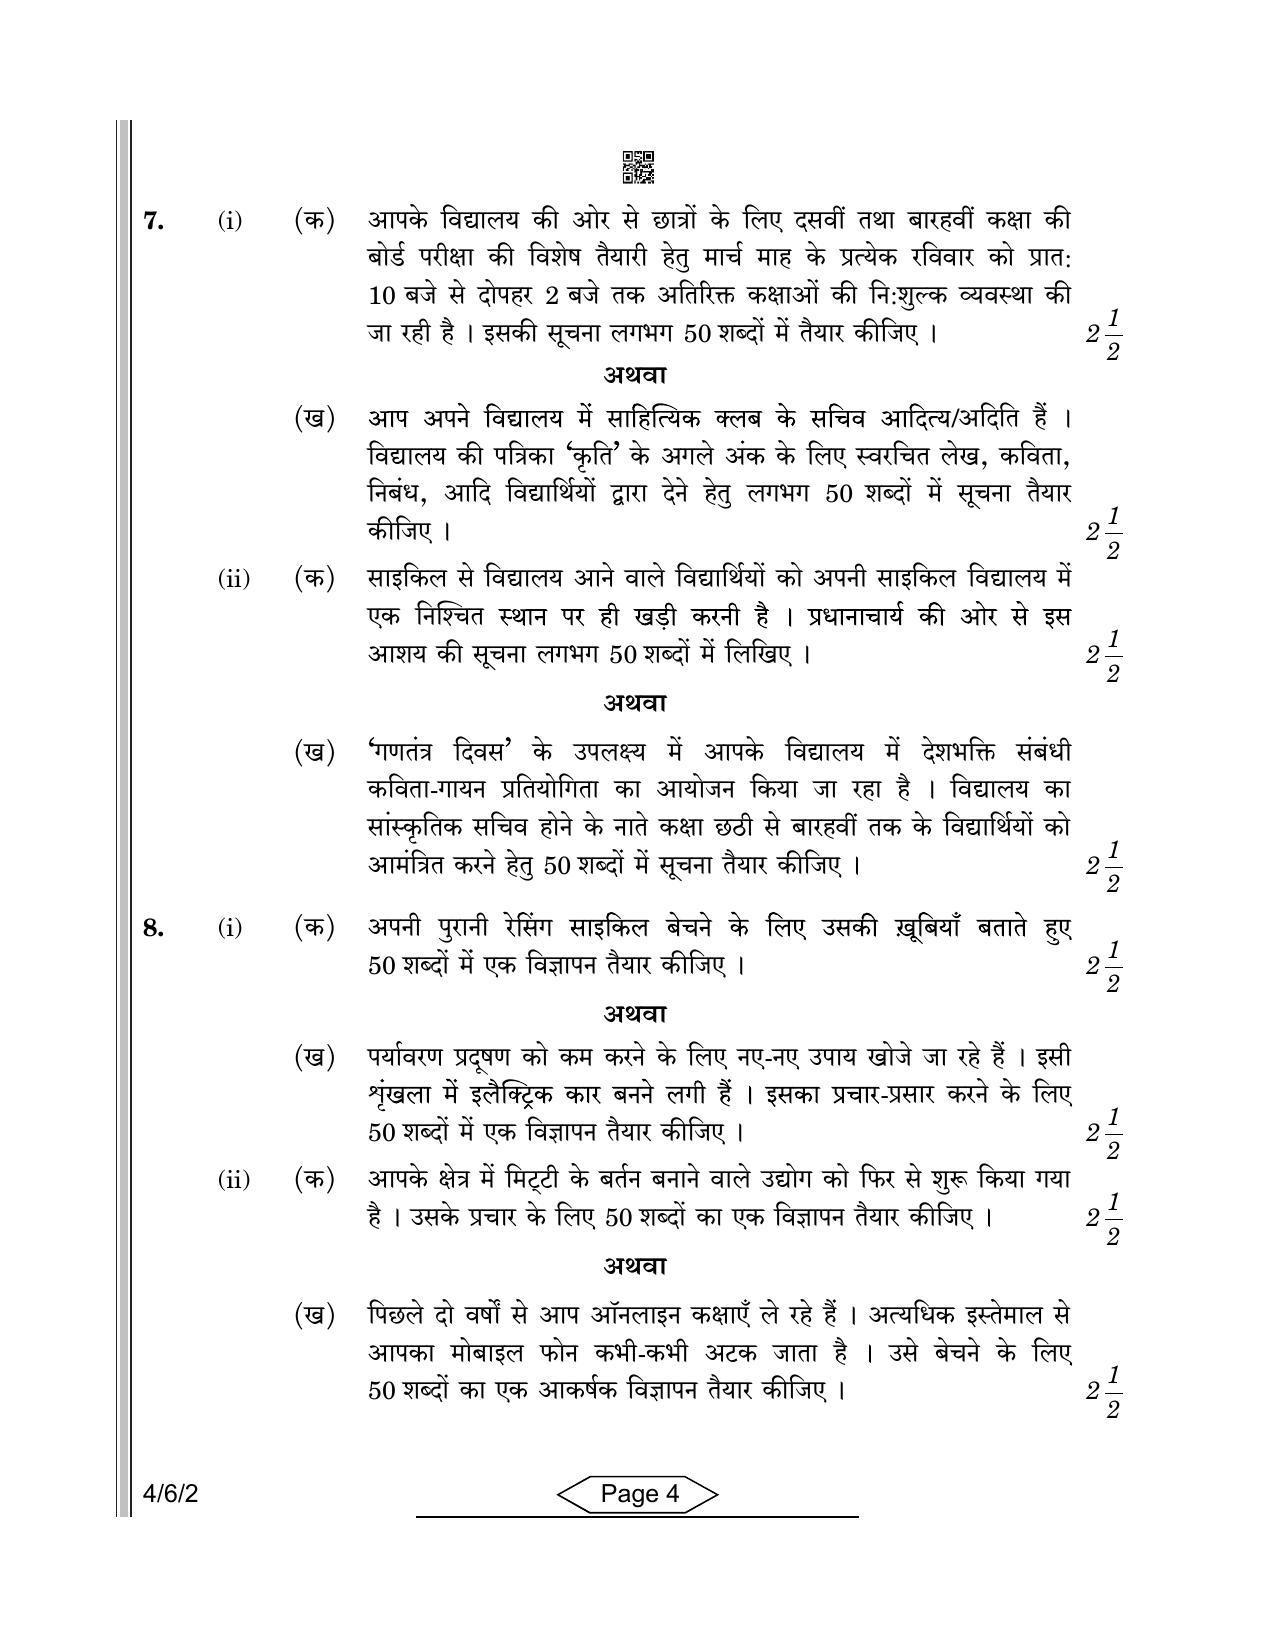 CBSE Class 10 4-6-2 Hindi-B 2022 Compartment Question Paper - Page 4